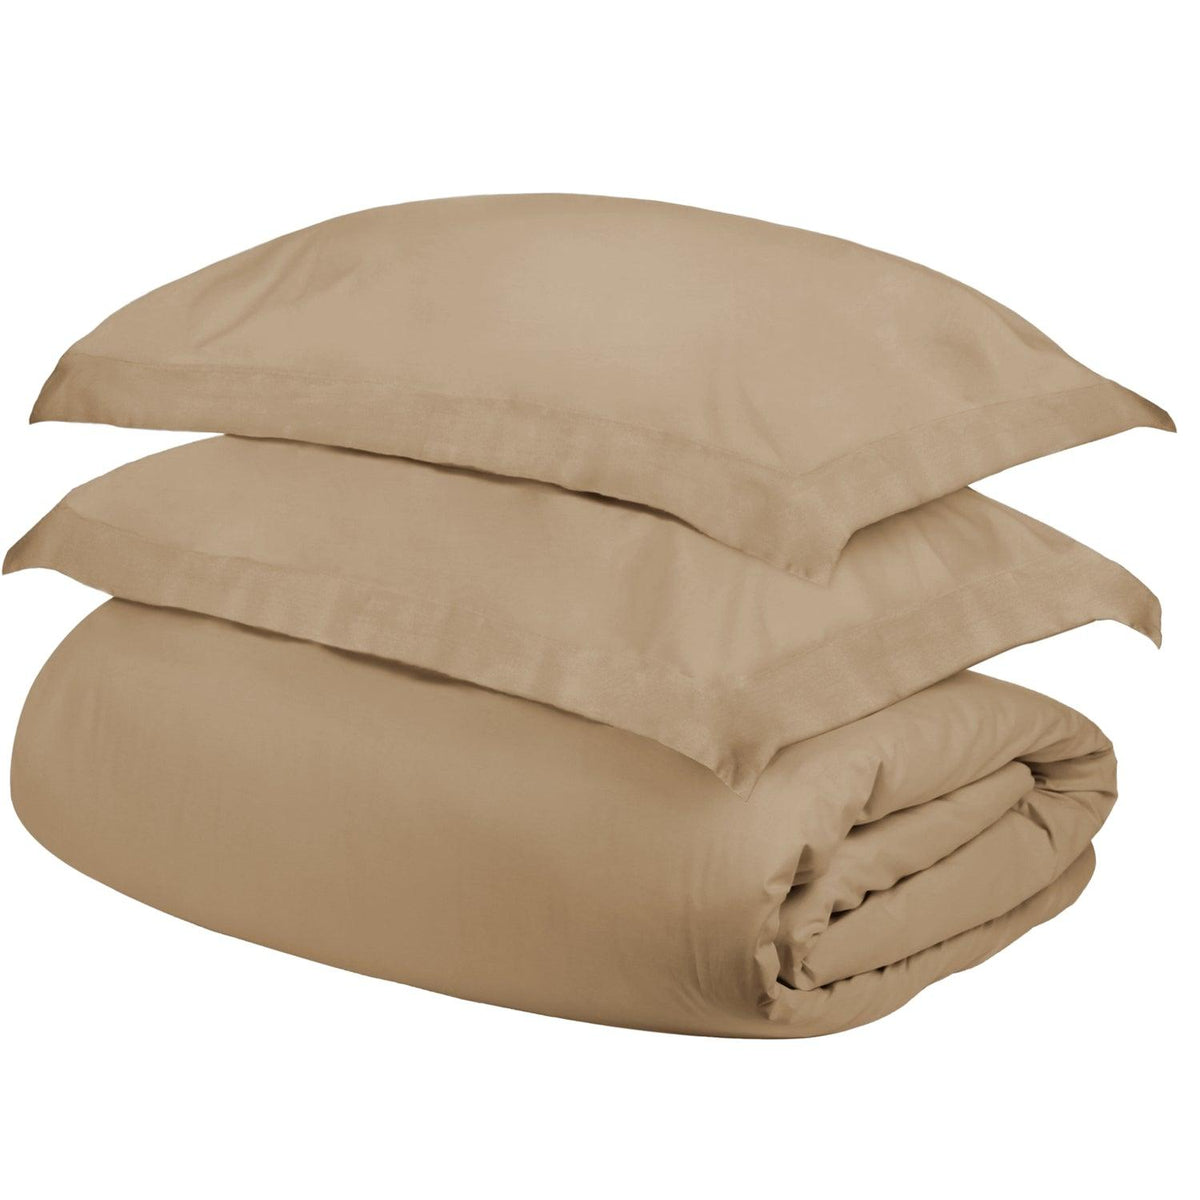  Superior Egyptian Cotton 400 Thread Count Solid Duvet Cover Set - Tan